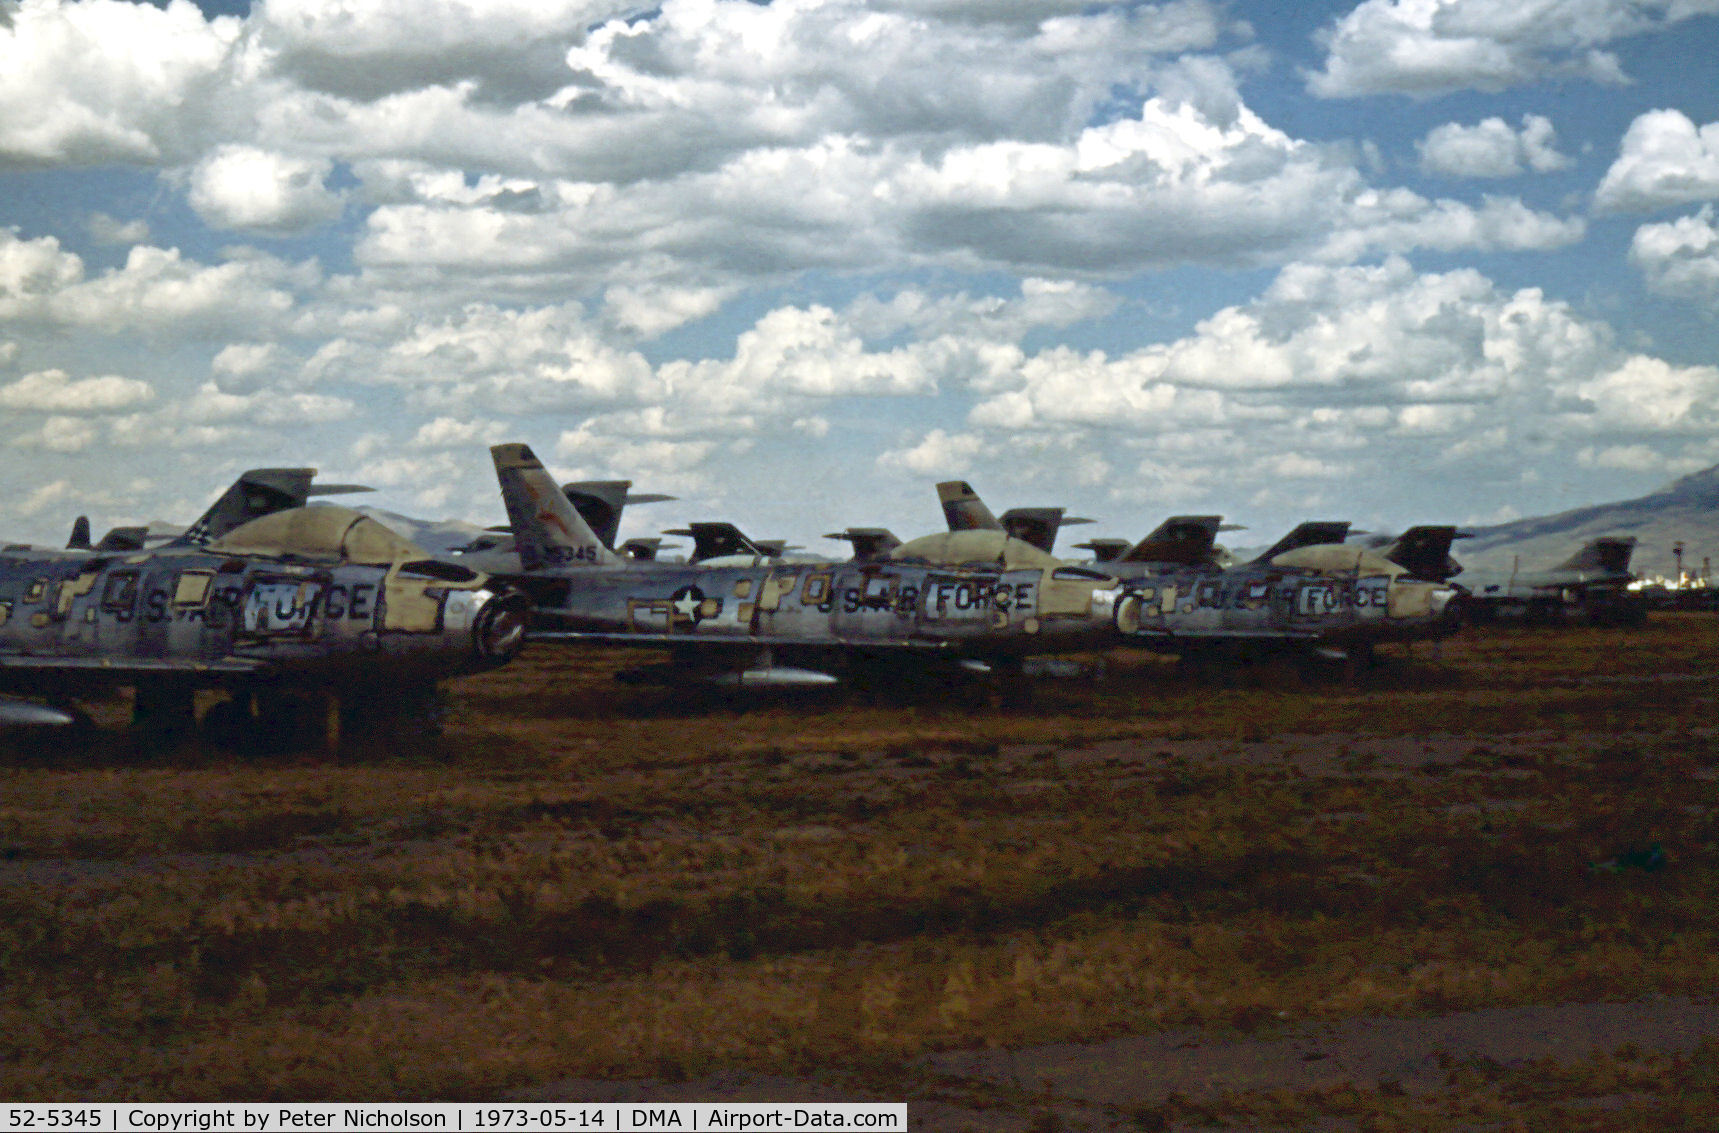 52-5345, 1952 North American F-86F-25-NA Sabre C/N 193-74, Former Tactical Air Command F-86F Sabre seen in the Summer of 1973 in what was then known as the Military Aircraft Storage & Disposition Centre at Davis-Monthan AFB